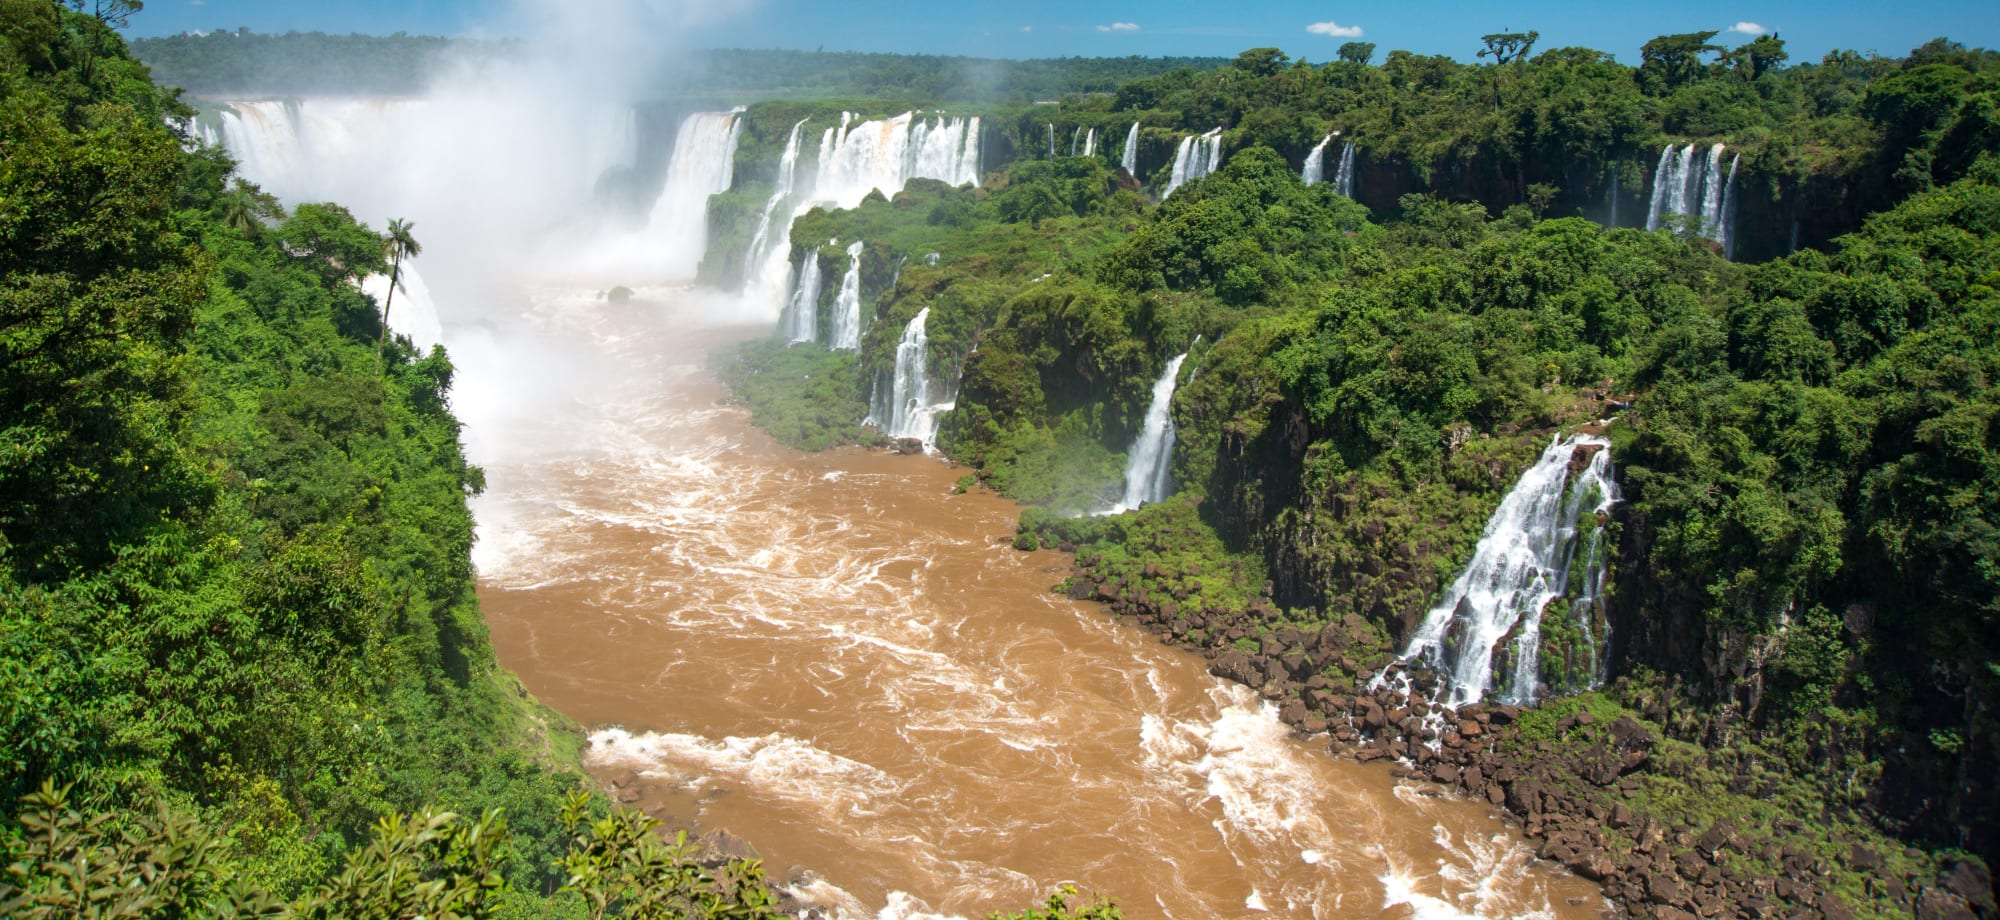 The Complete Guide to the Iguazu Falls in Argentina